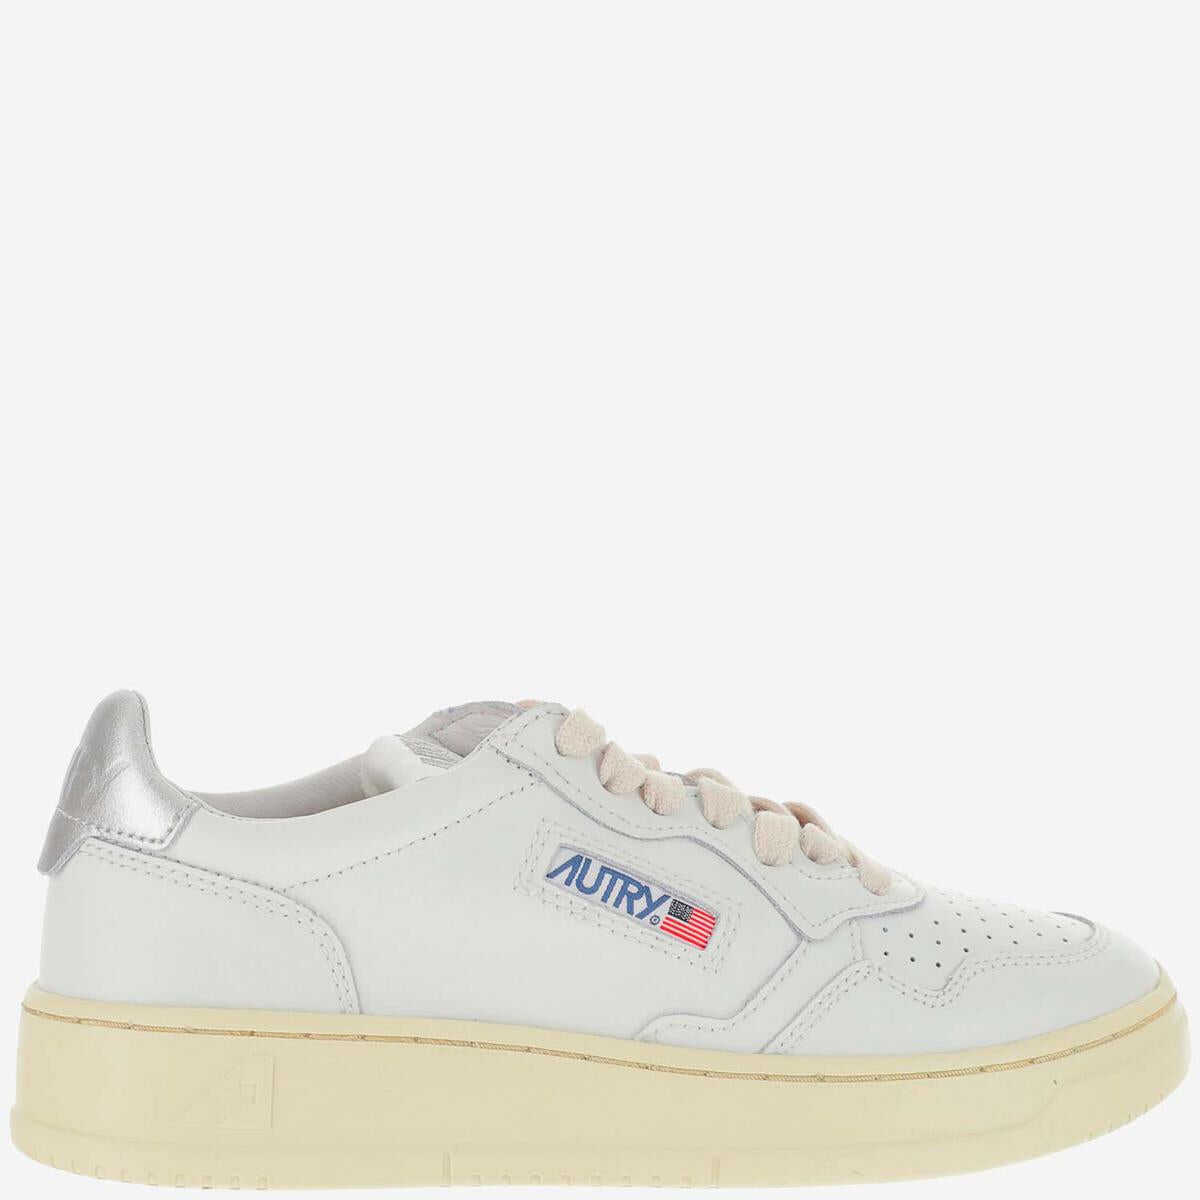 AUTRY AUTRY MEDALIST LOW LEATHER SNEAKERS WHT/SIL